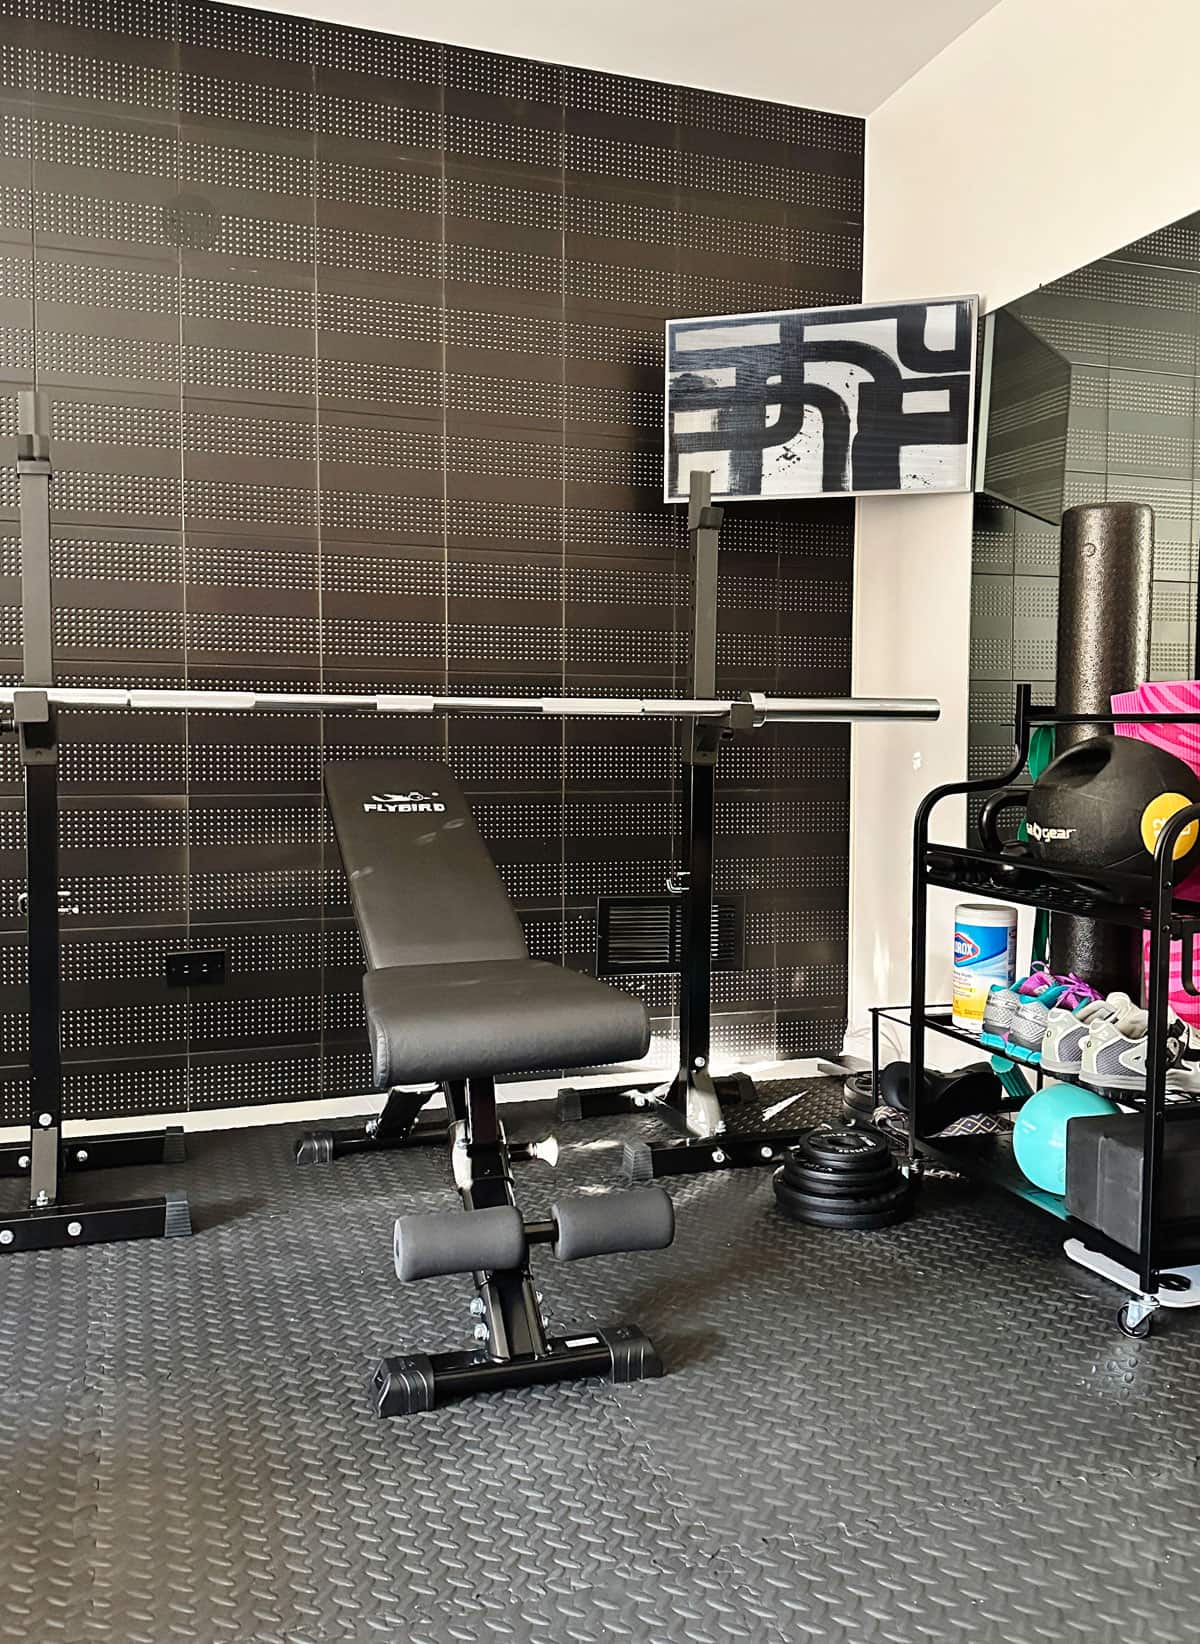 The Best Home Gym Essentials for a Small Space - The Basic